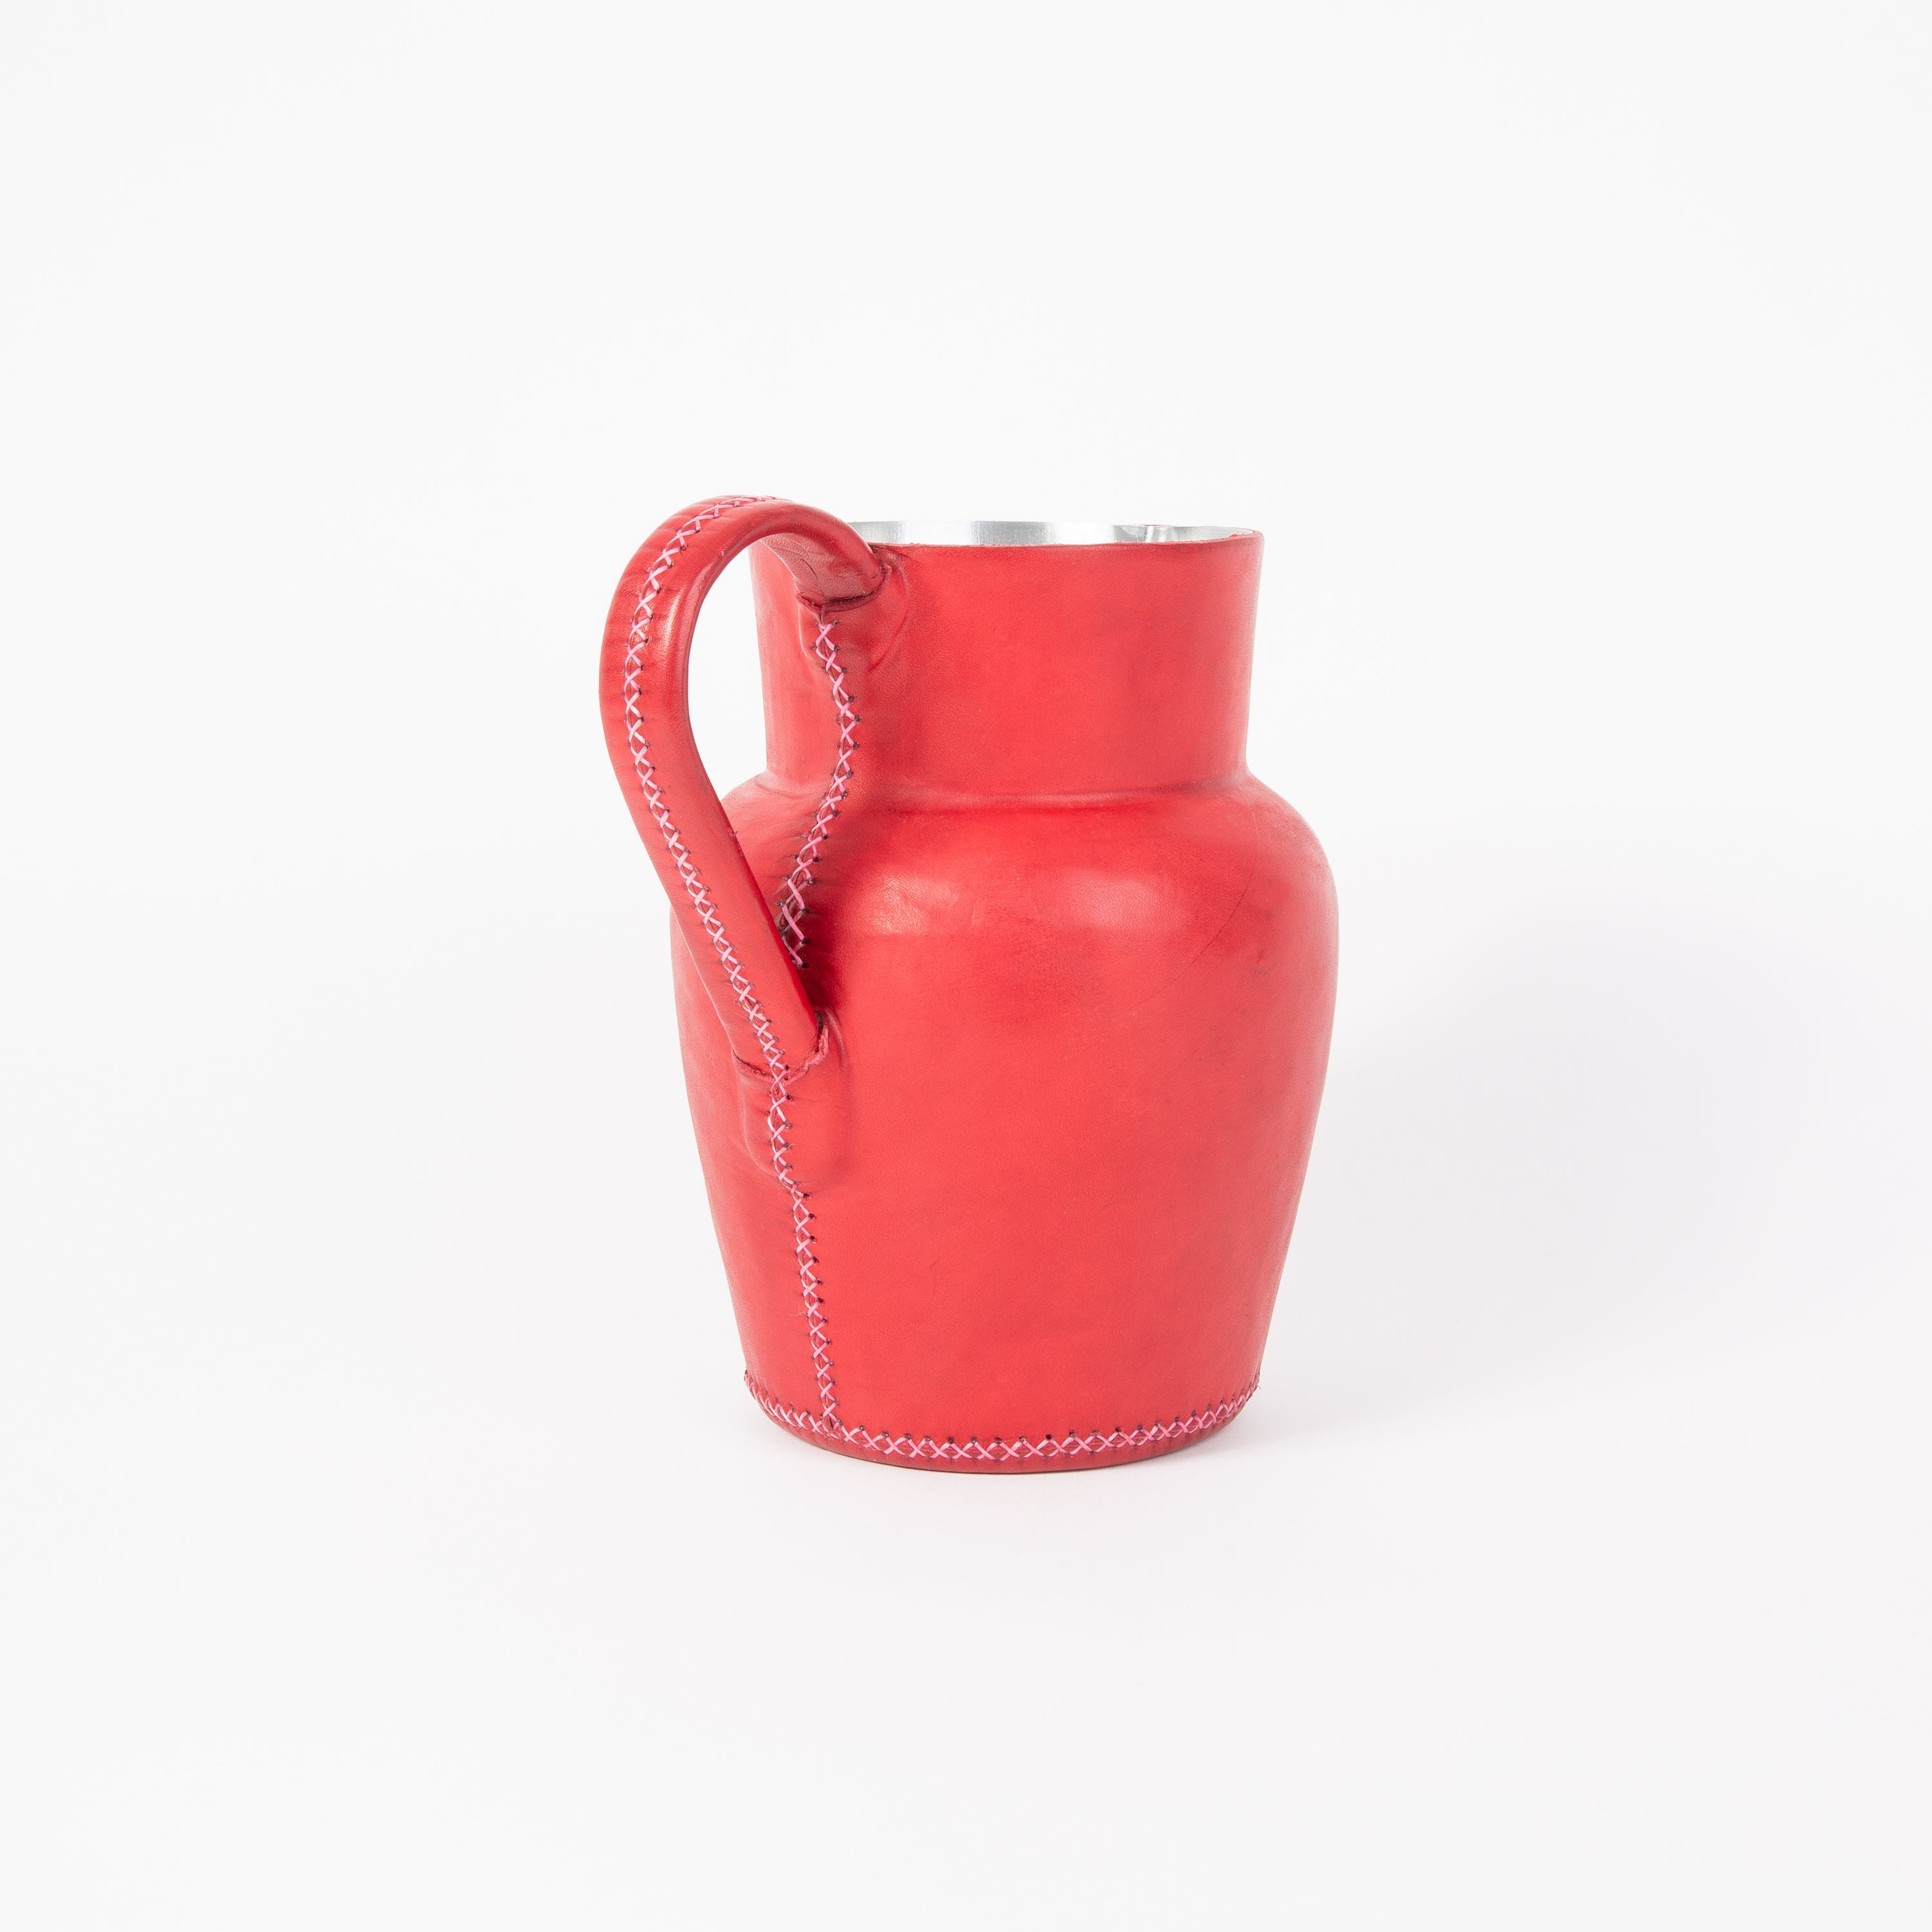 Fuchsia Leather Carafe | Leather Pitcher | Leather Vase | Leather Home Goods | Home Goods | Home and Garden | Interior Design | Leather Tablewares | Leather Barwares | Leather Accessories | Bati Leather Goods